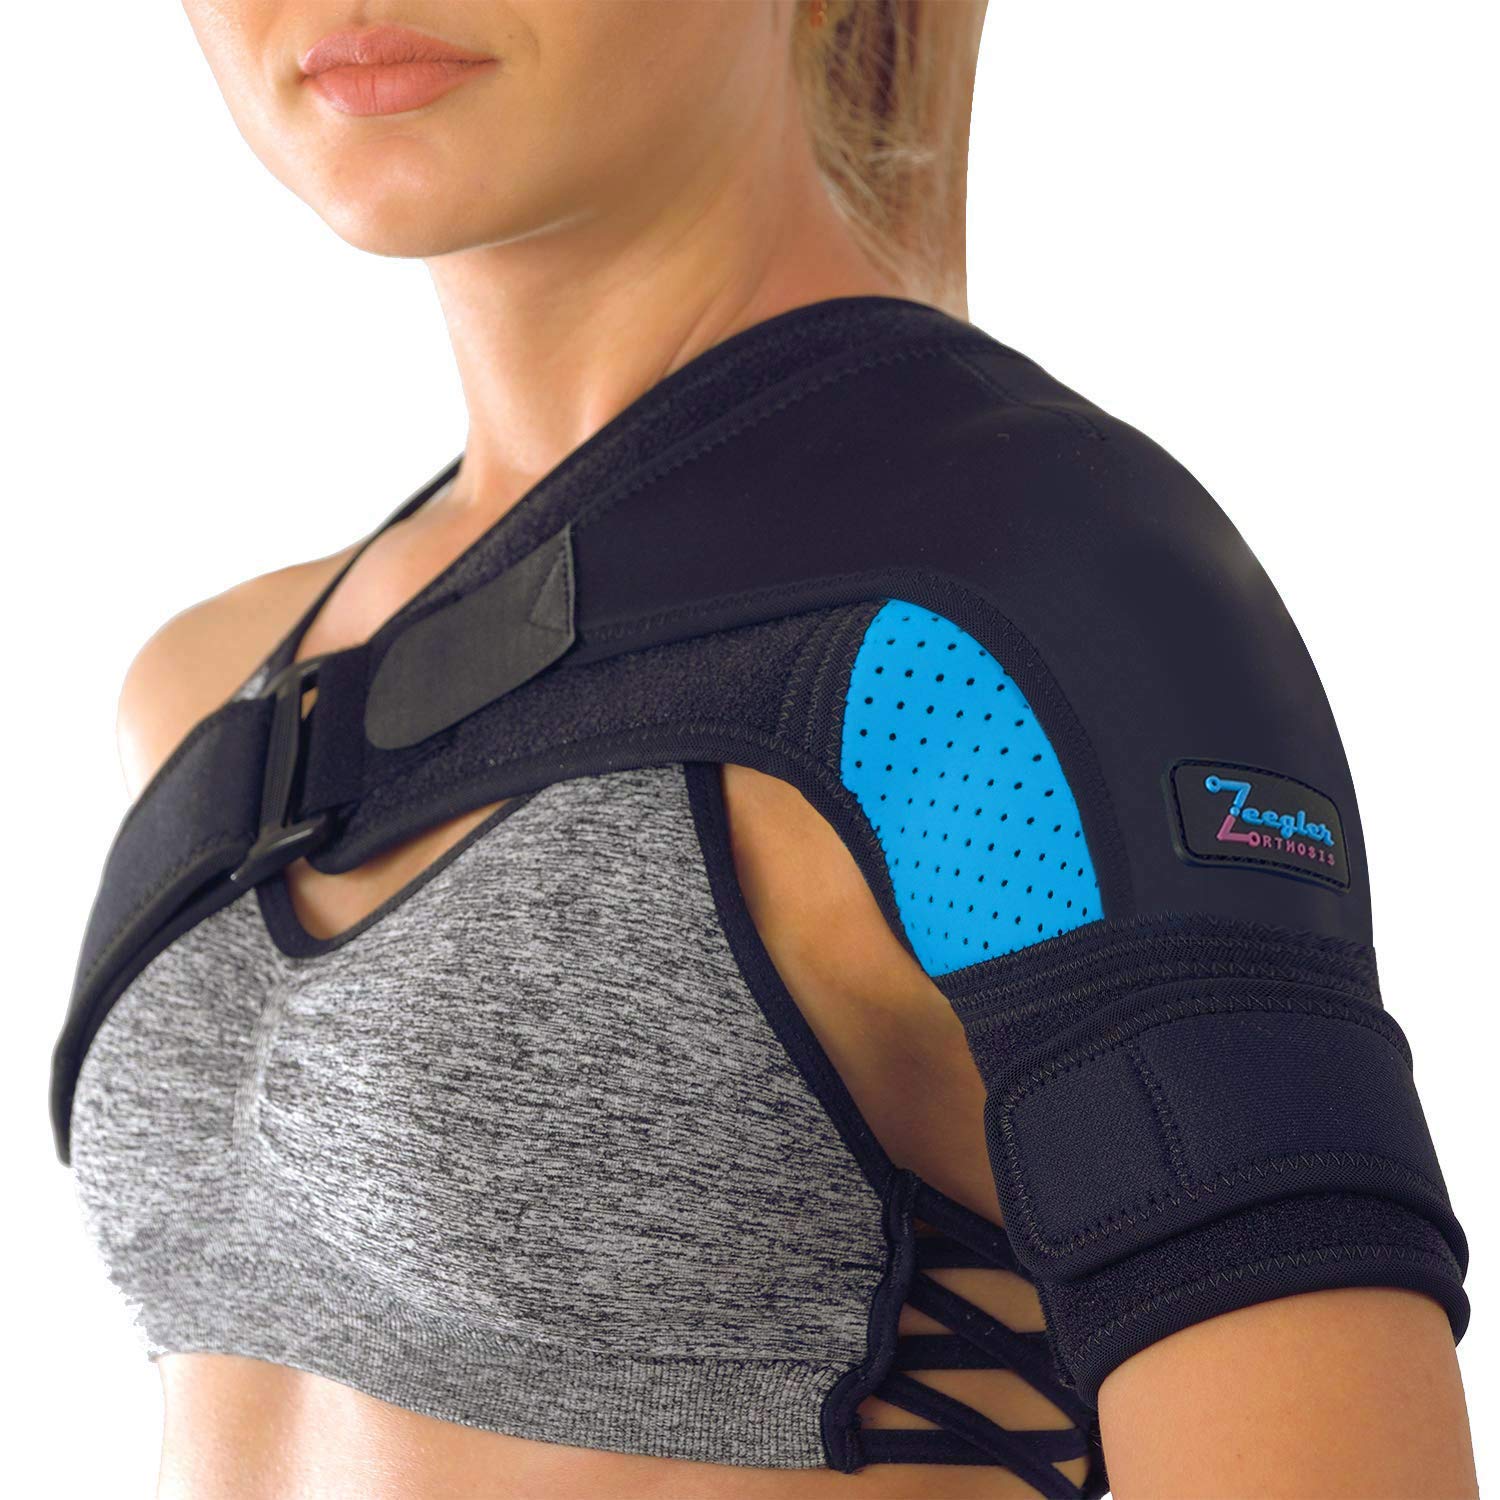 Shoulder Brace Support Compression Sleeve Torn Rotator Cuff Joint Pain  Relief 